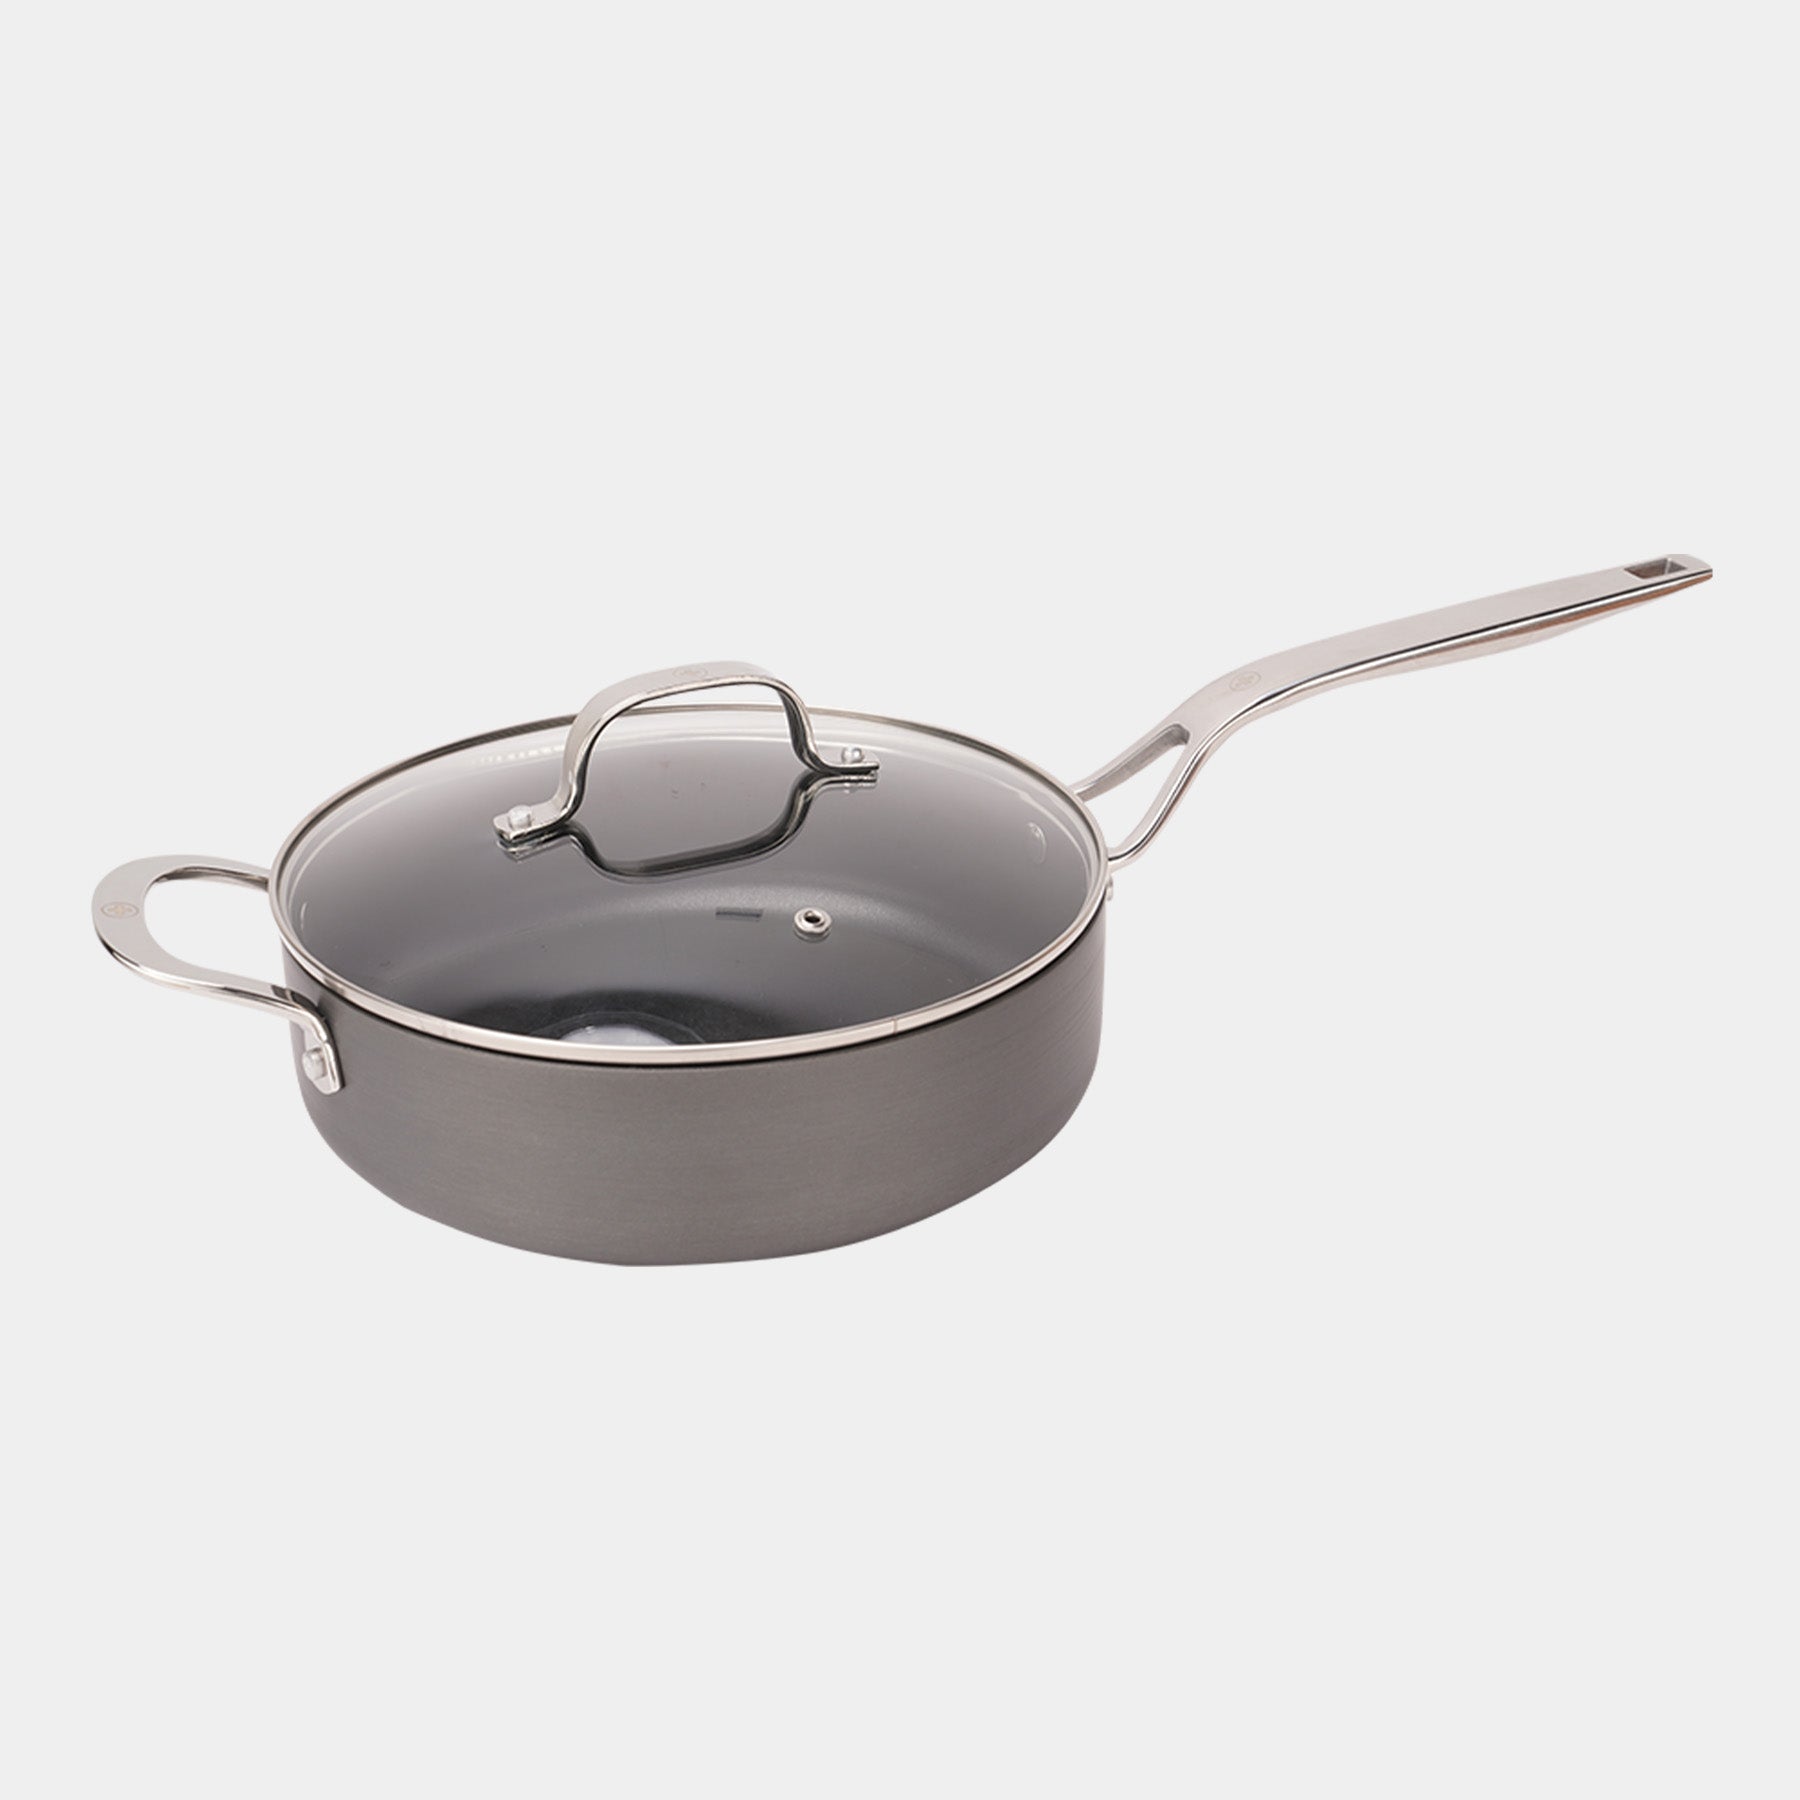 Hard Anodised 3 qt Saute Pan with Glass Lid - Induction